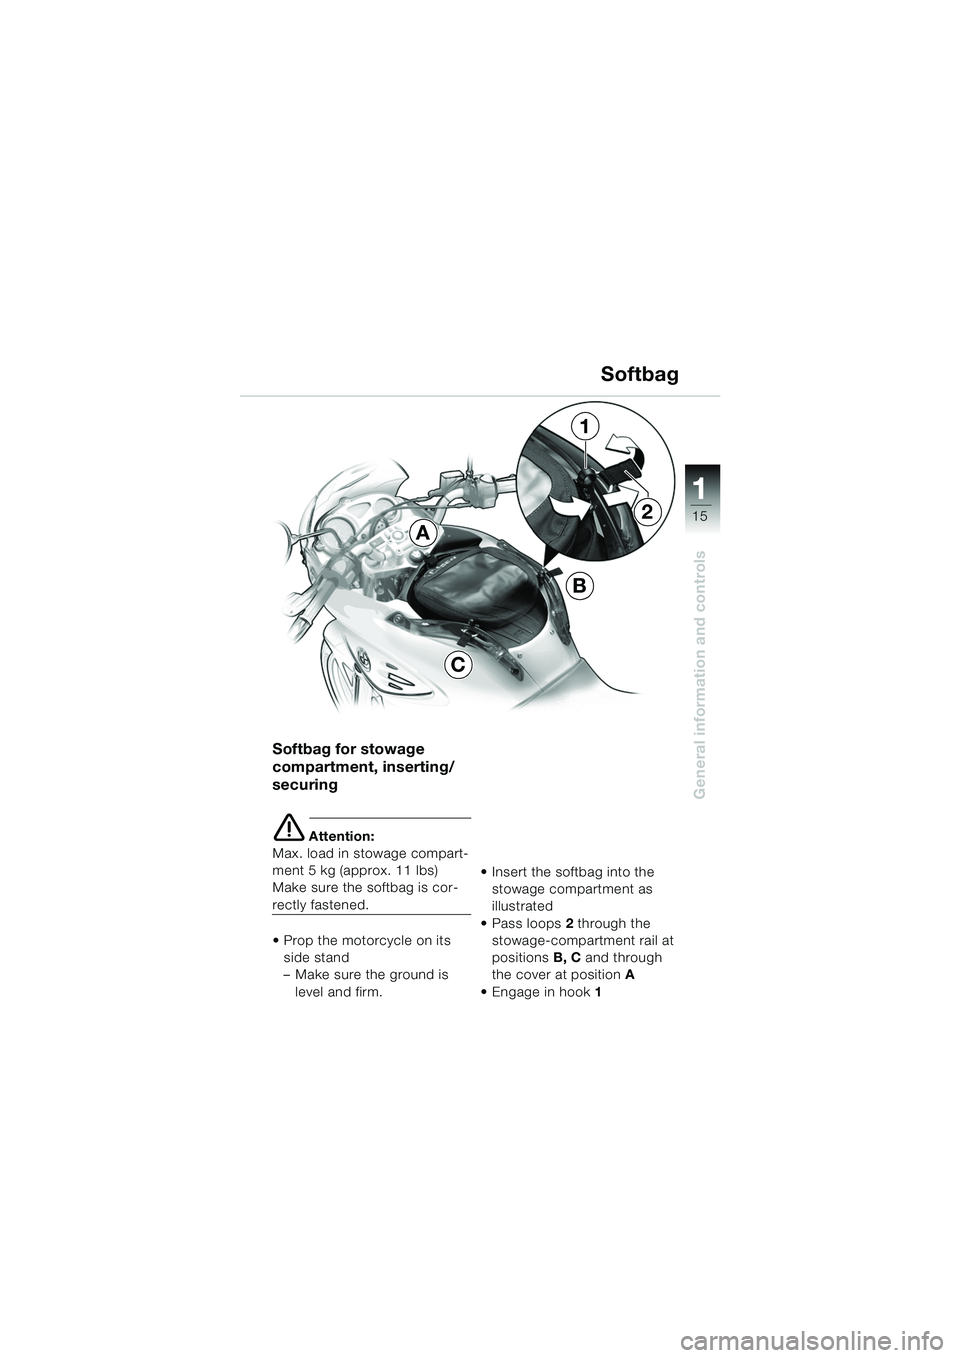 BMW MOTORRAD F 650 CS 2003  Riders Manual (in English) 111
15
General information and controls
Softbag
Softbag for stowage 
compartment, inserting/
securing
e Attention:
Max. load in stowage compart-
ment 5 kg (approx. 11 lbs)
Make sure the softbag is cor